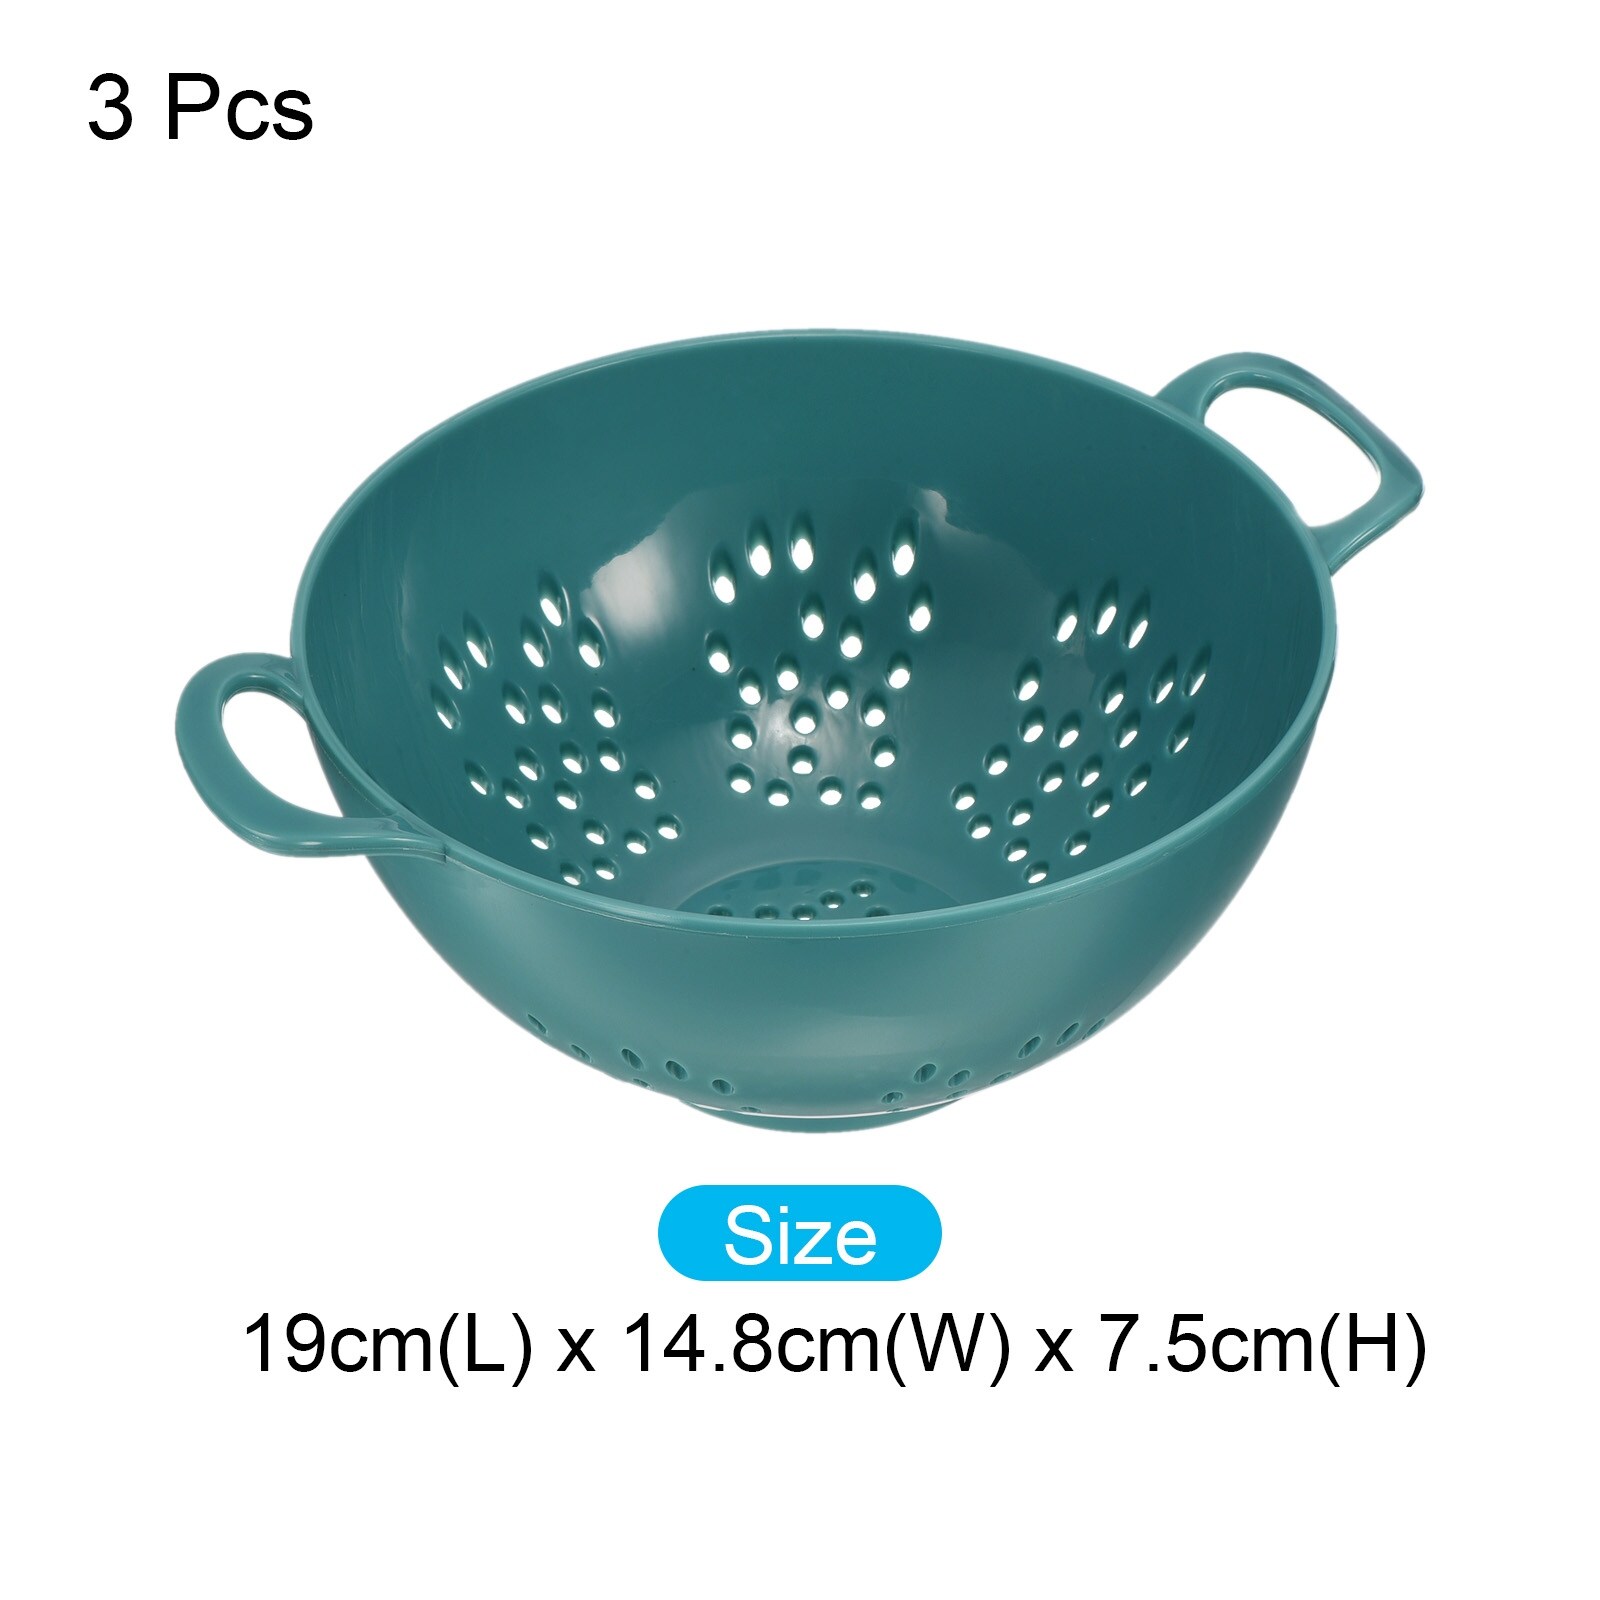 Wolfgang Puck 12-Piece Stainless Steel Mixing Bowl Set, Silicone